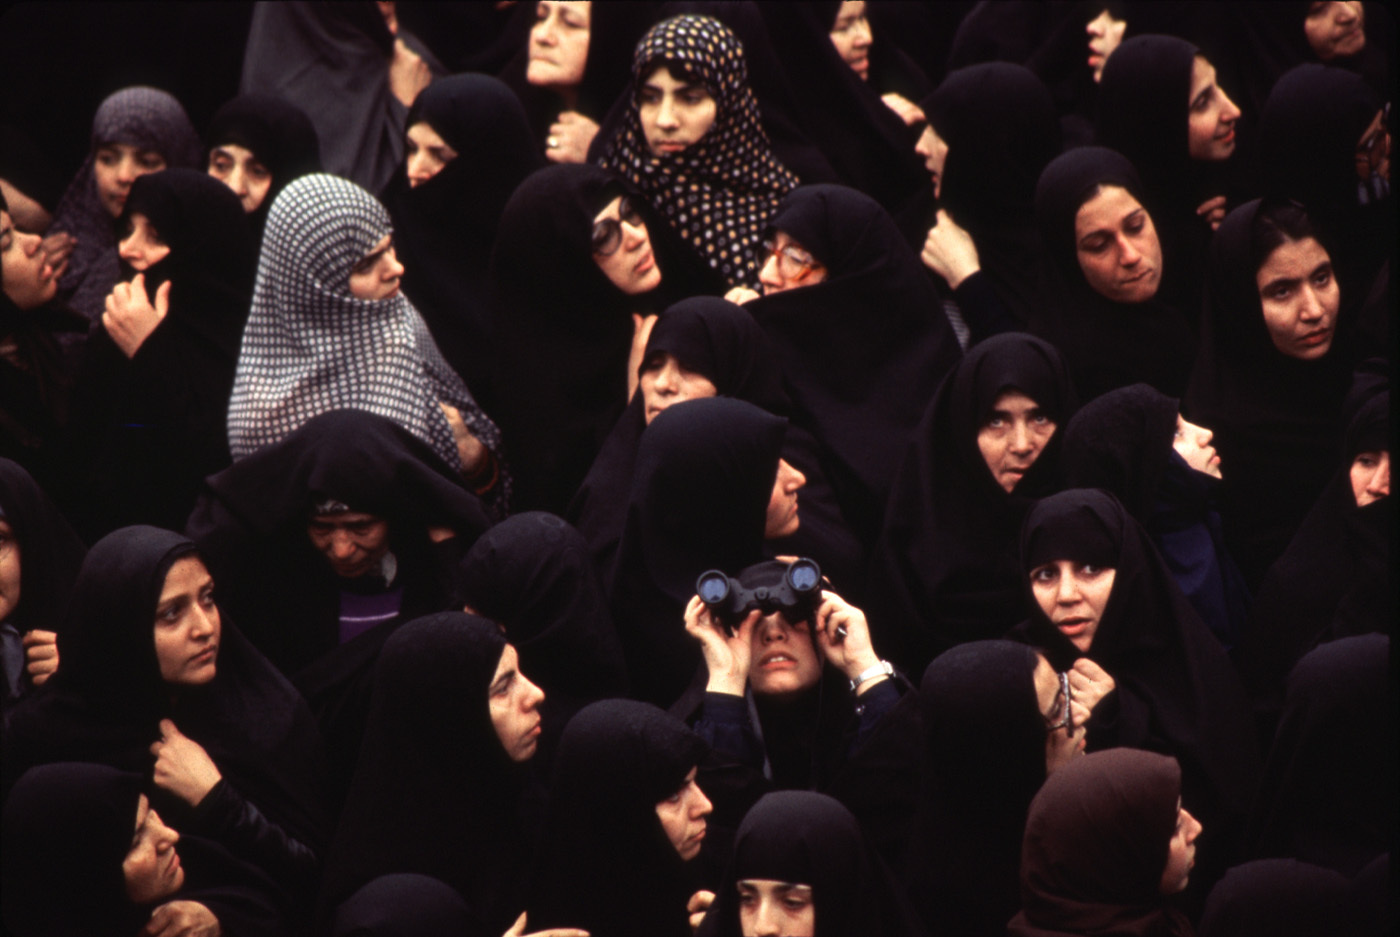 Outside Khomeini's room at the school, hundreds of chador-clad women gather to see a glimpse of the Ayatollah. : 44 Days: the Iranian Revolution : David Burnett | Photographer